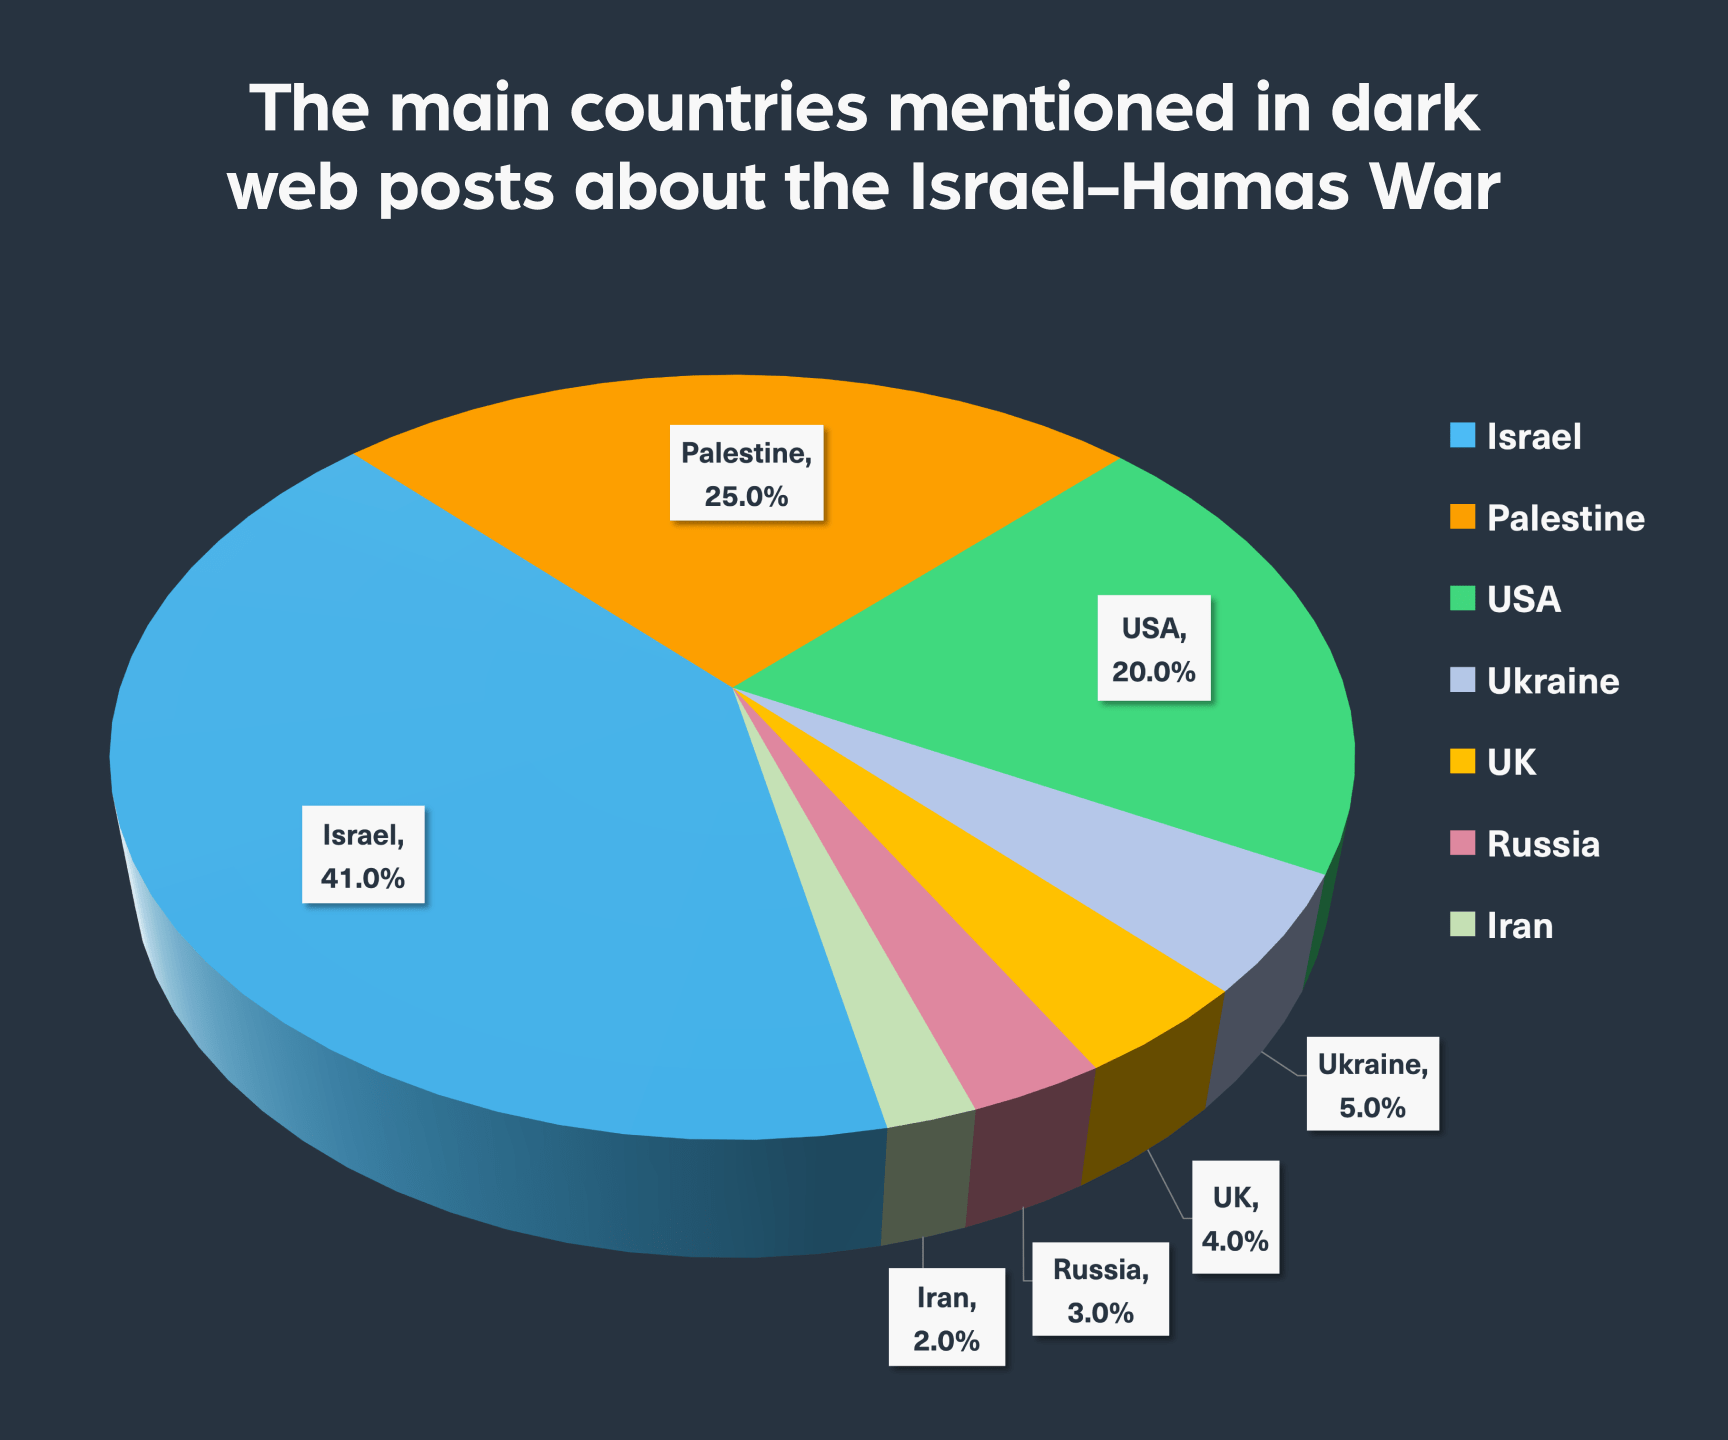 The main countries mentioned in dark web posts about the Israel-Hamas War